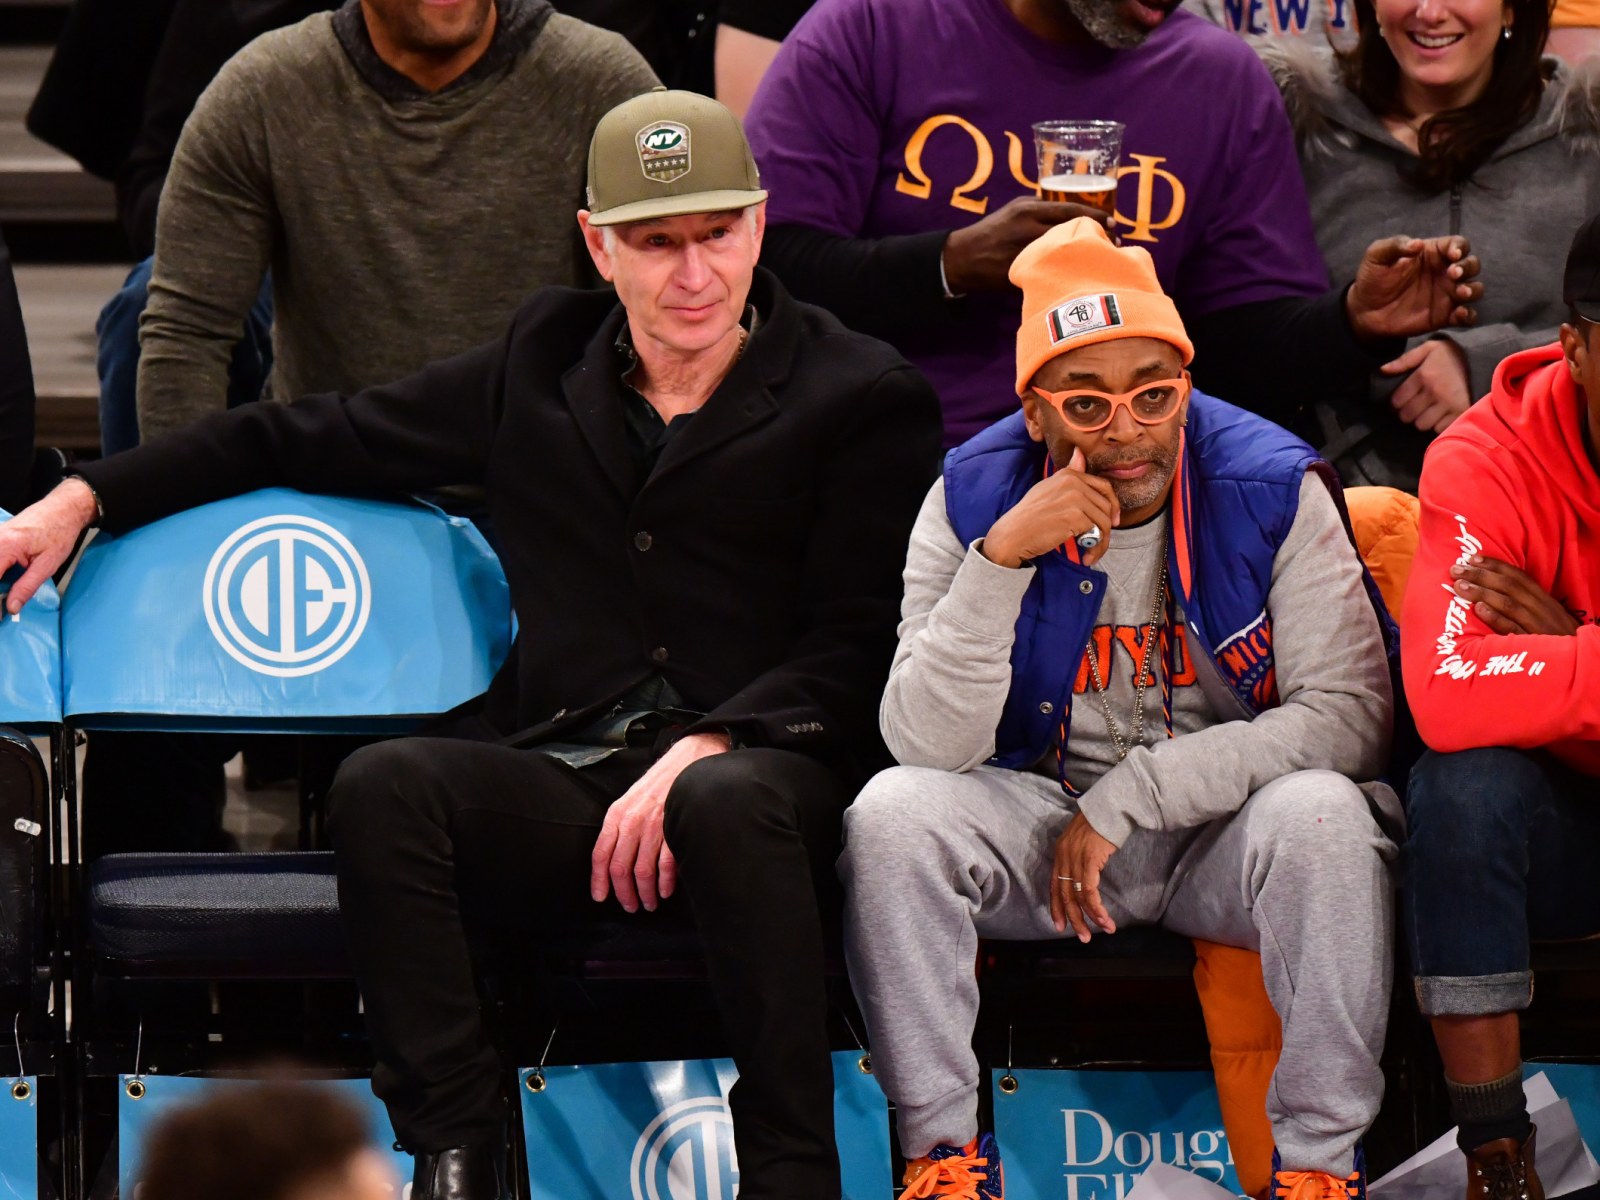 Spike Lee to direct documentary series about 1990s Knicks